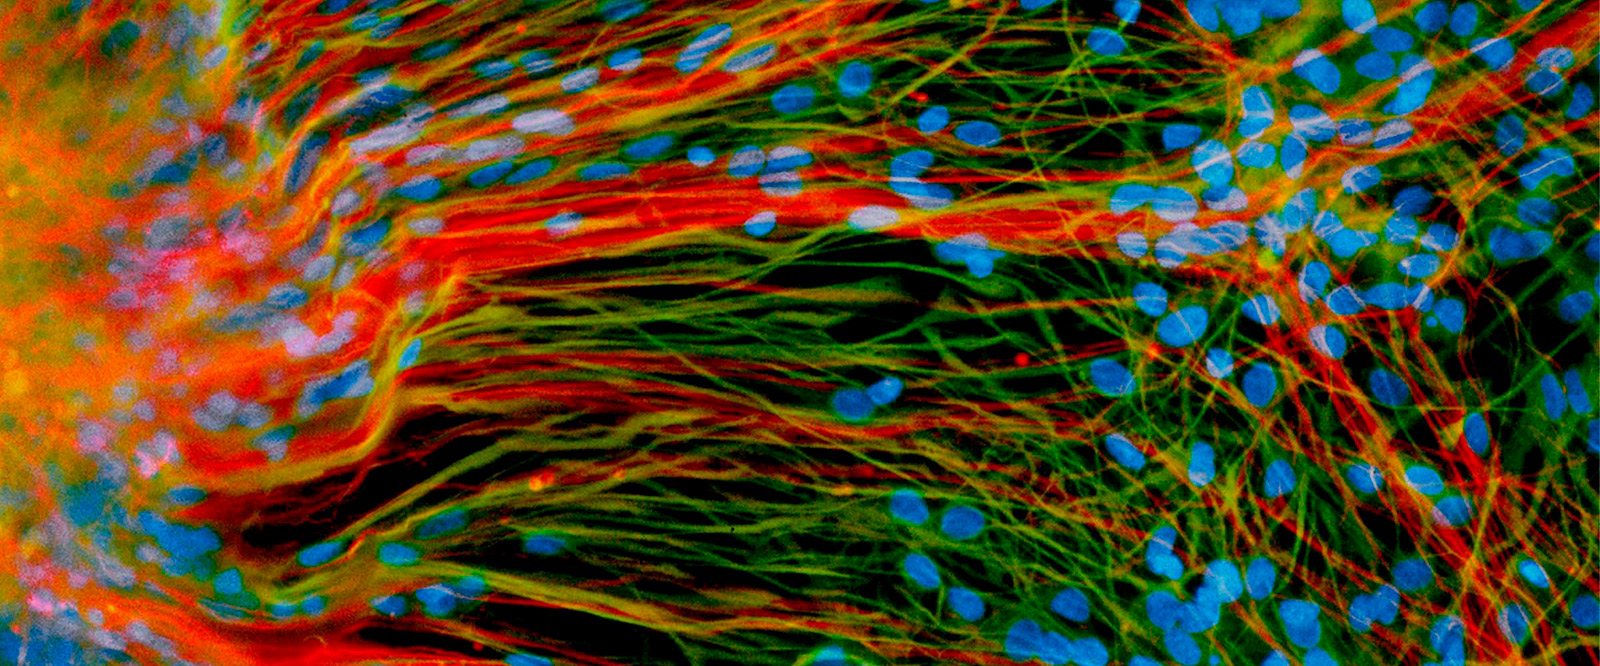 Derived from human embryonic stem cells, precursor neural cells grow in a lab dish and generate mature neurons (red) and glial cells (green)